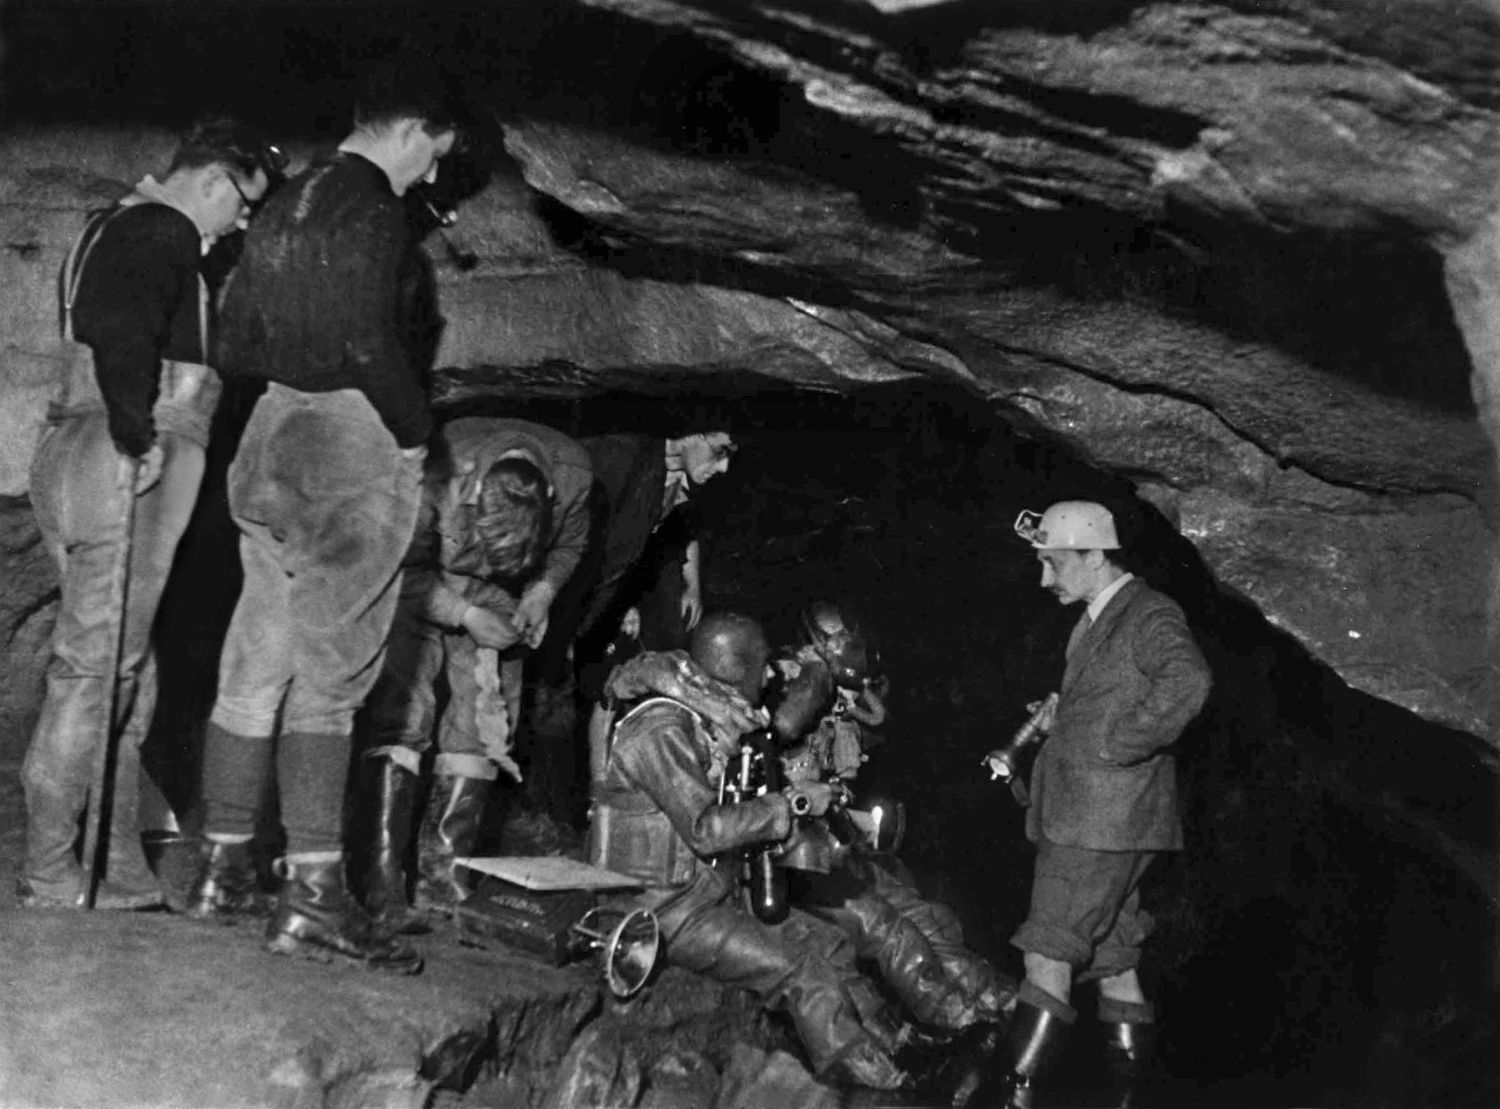 Operation Beta - Cave diving in Peak Cavern from 1947 to 1952